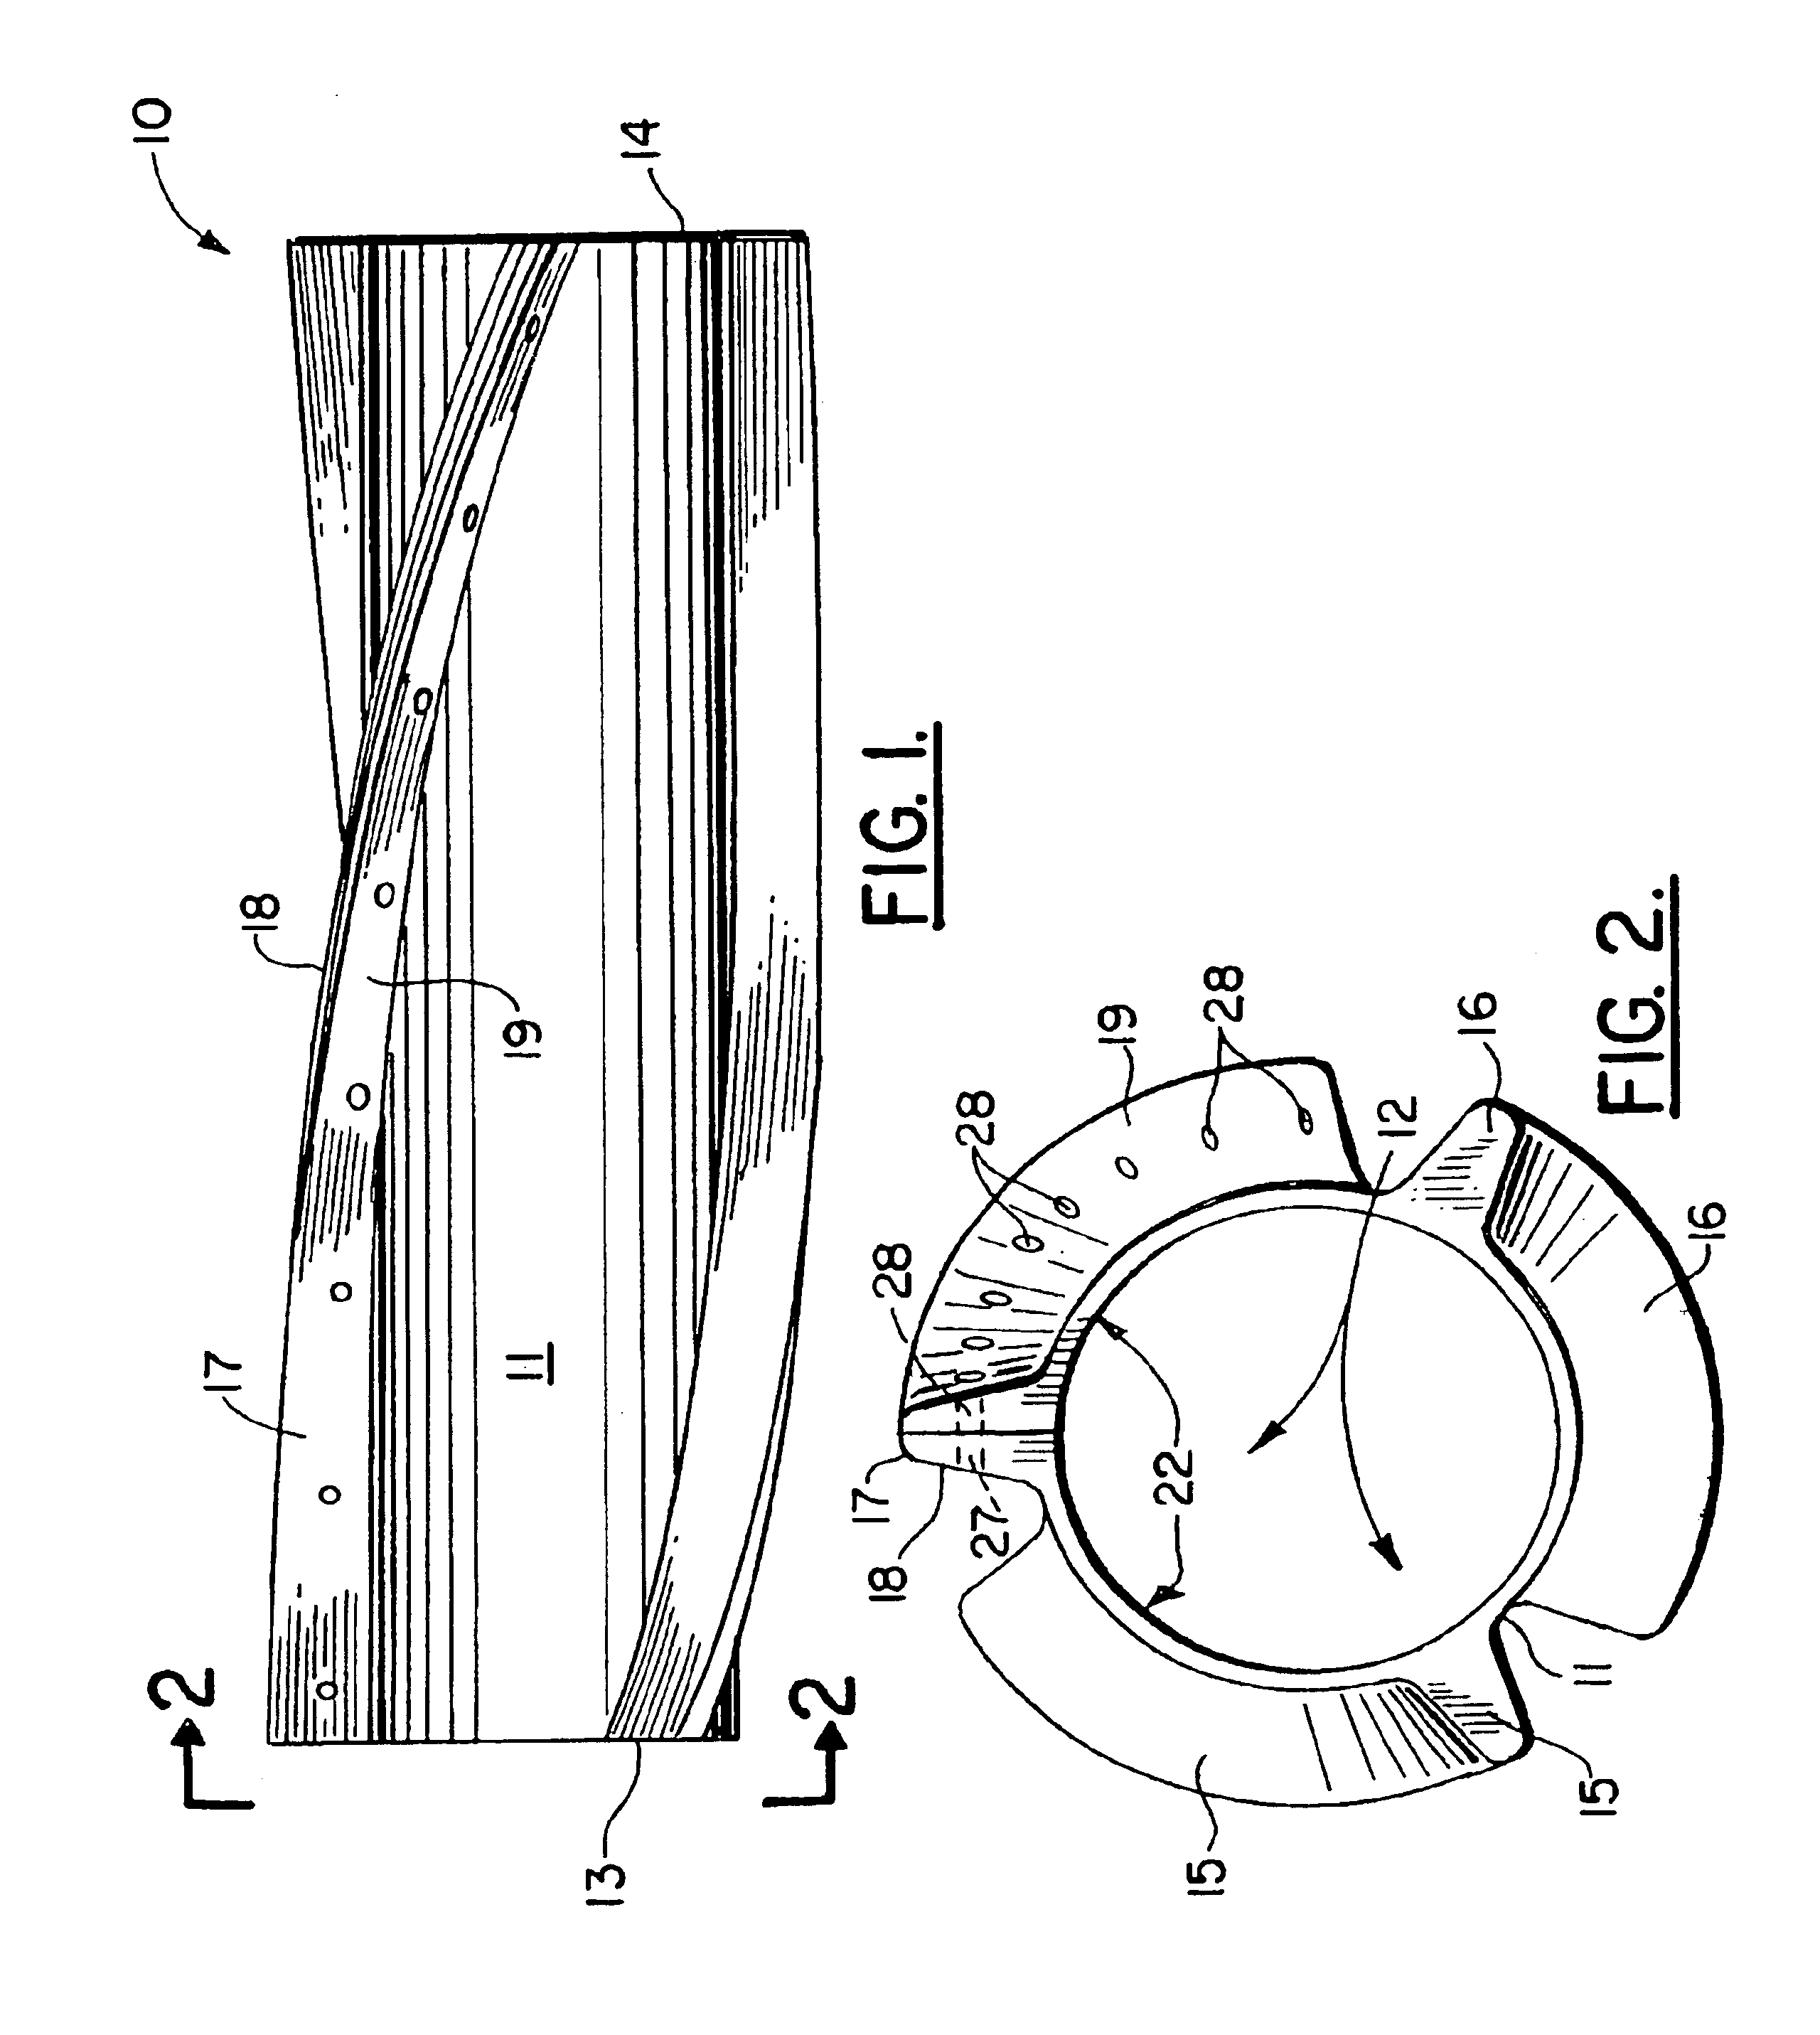 Vortex induced vibration suppression device and method